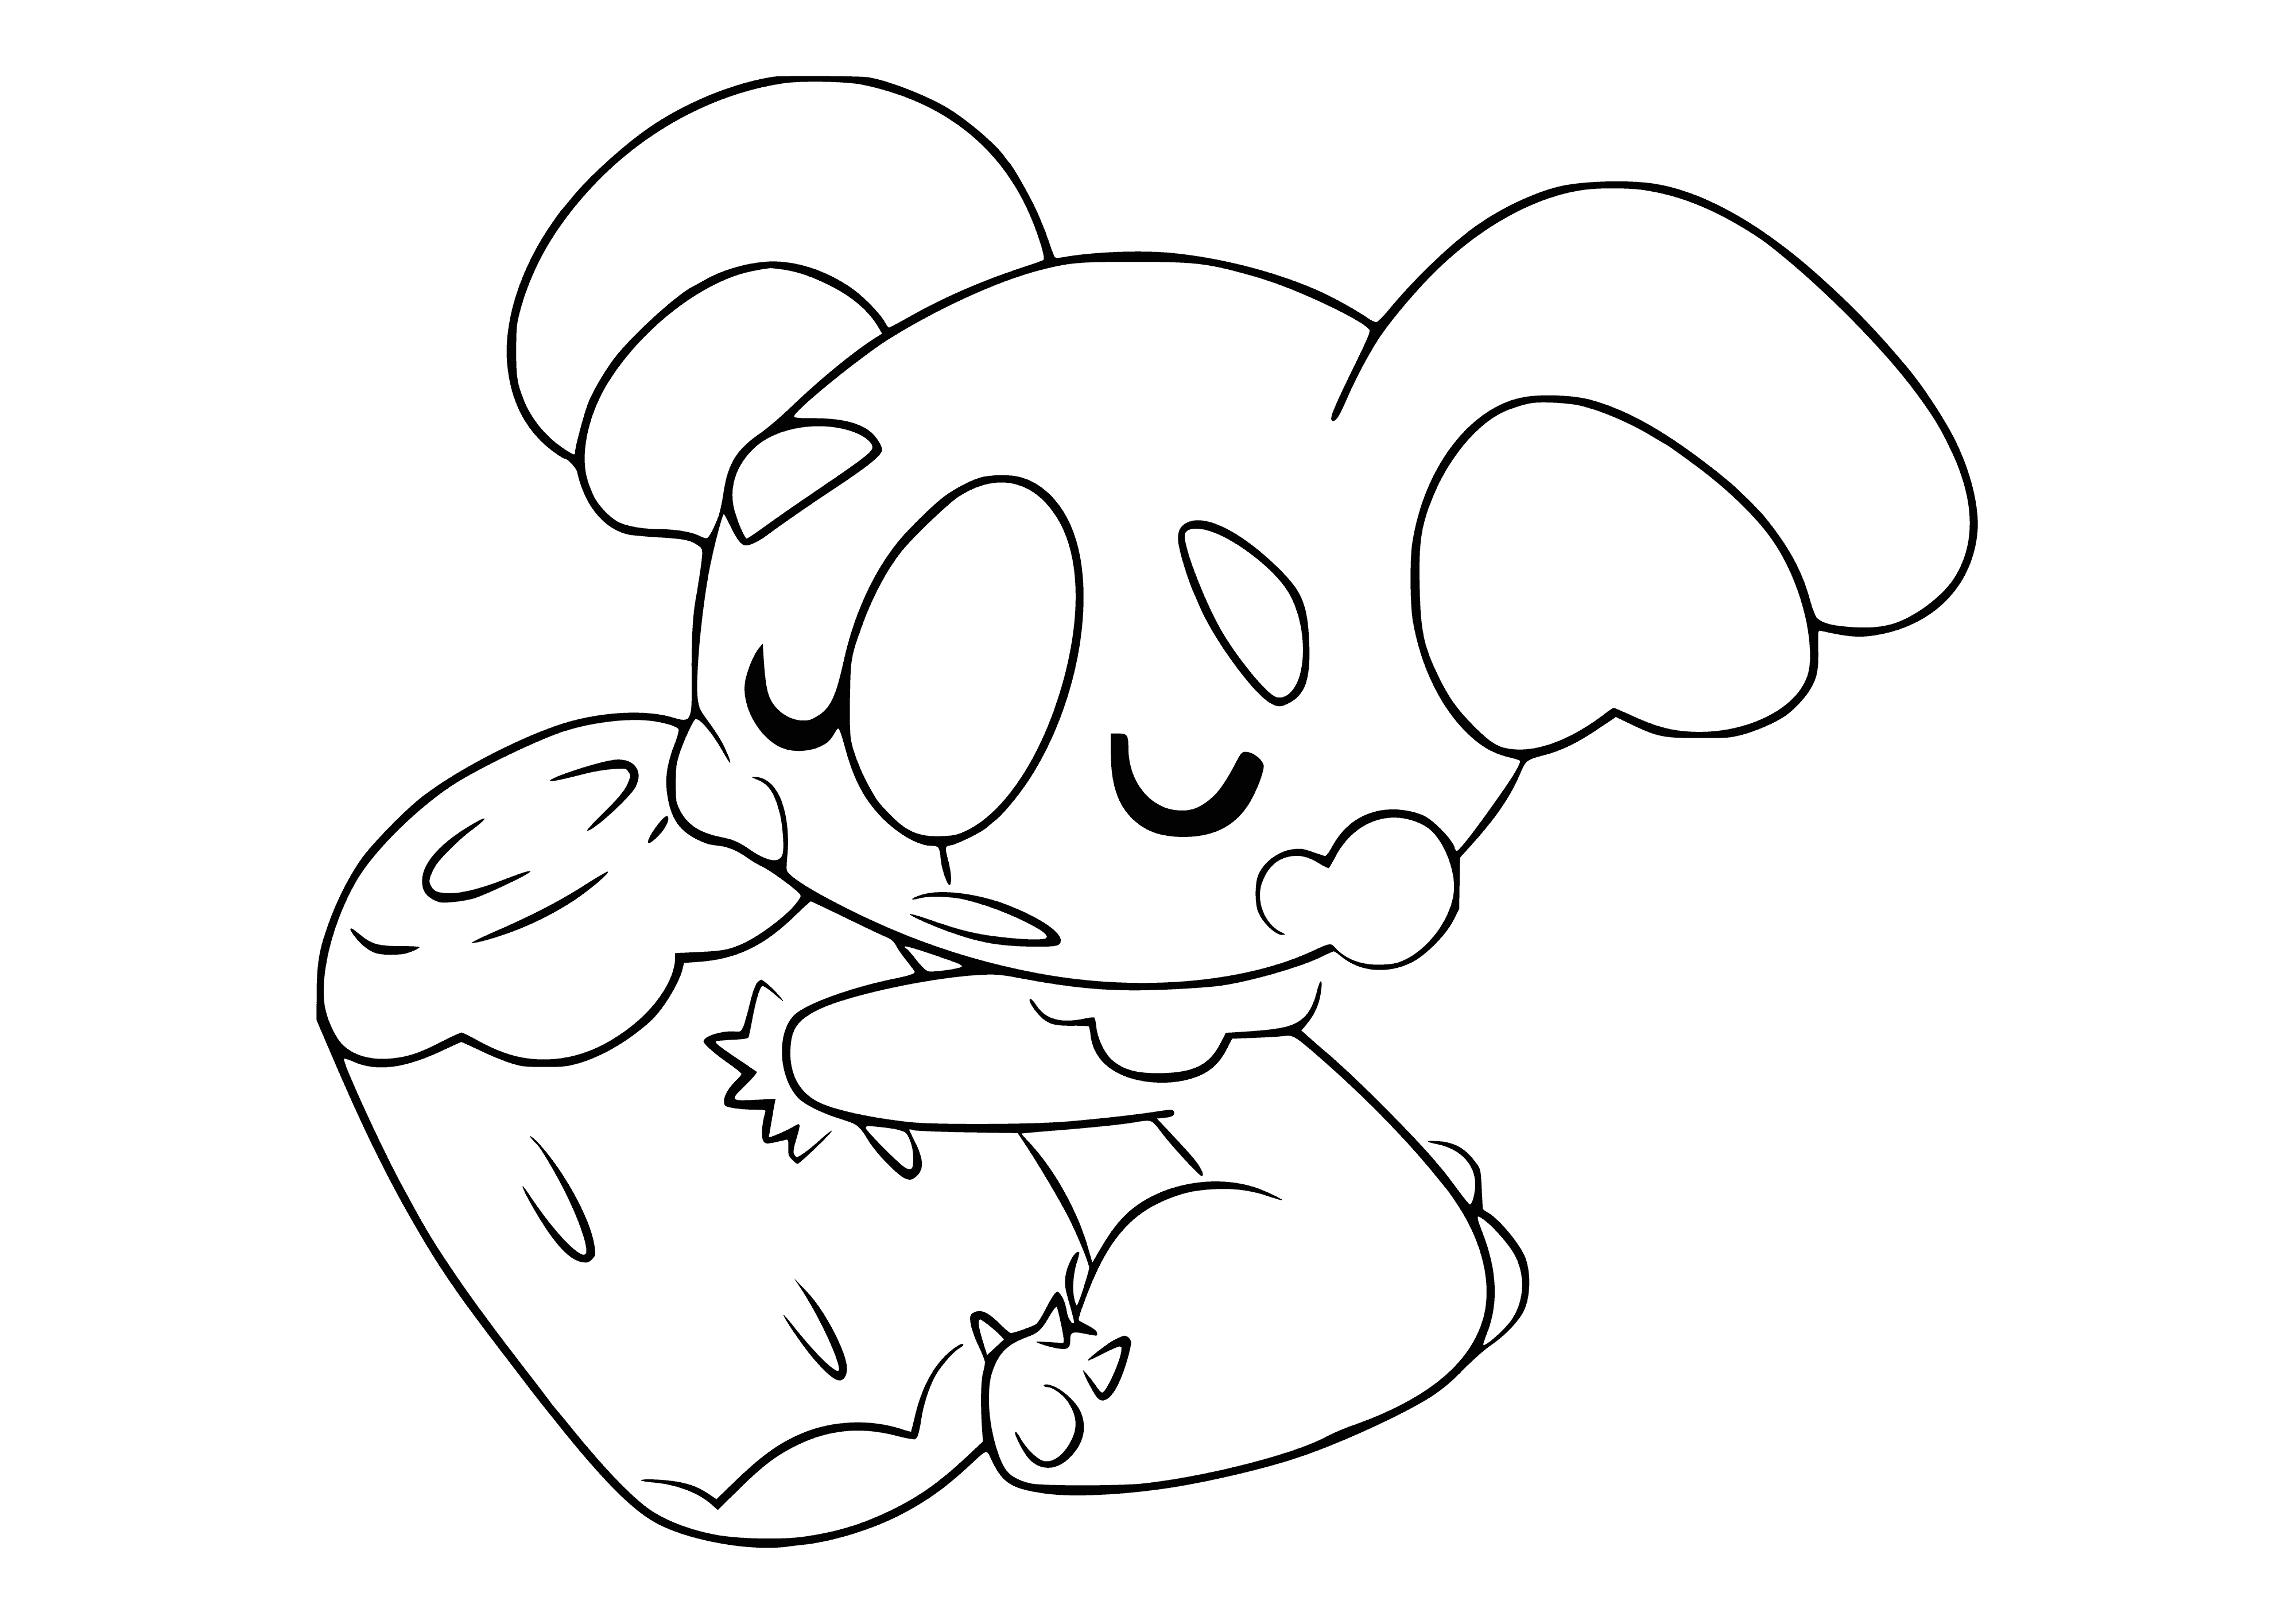 coloring page: Komala is a small, humanoid Pokémon with beige, black & red features, plus a large black tail shaped like a log. It's always asleep with blue circles over its eyes.